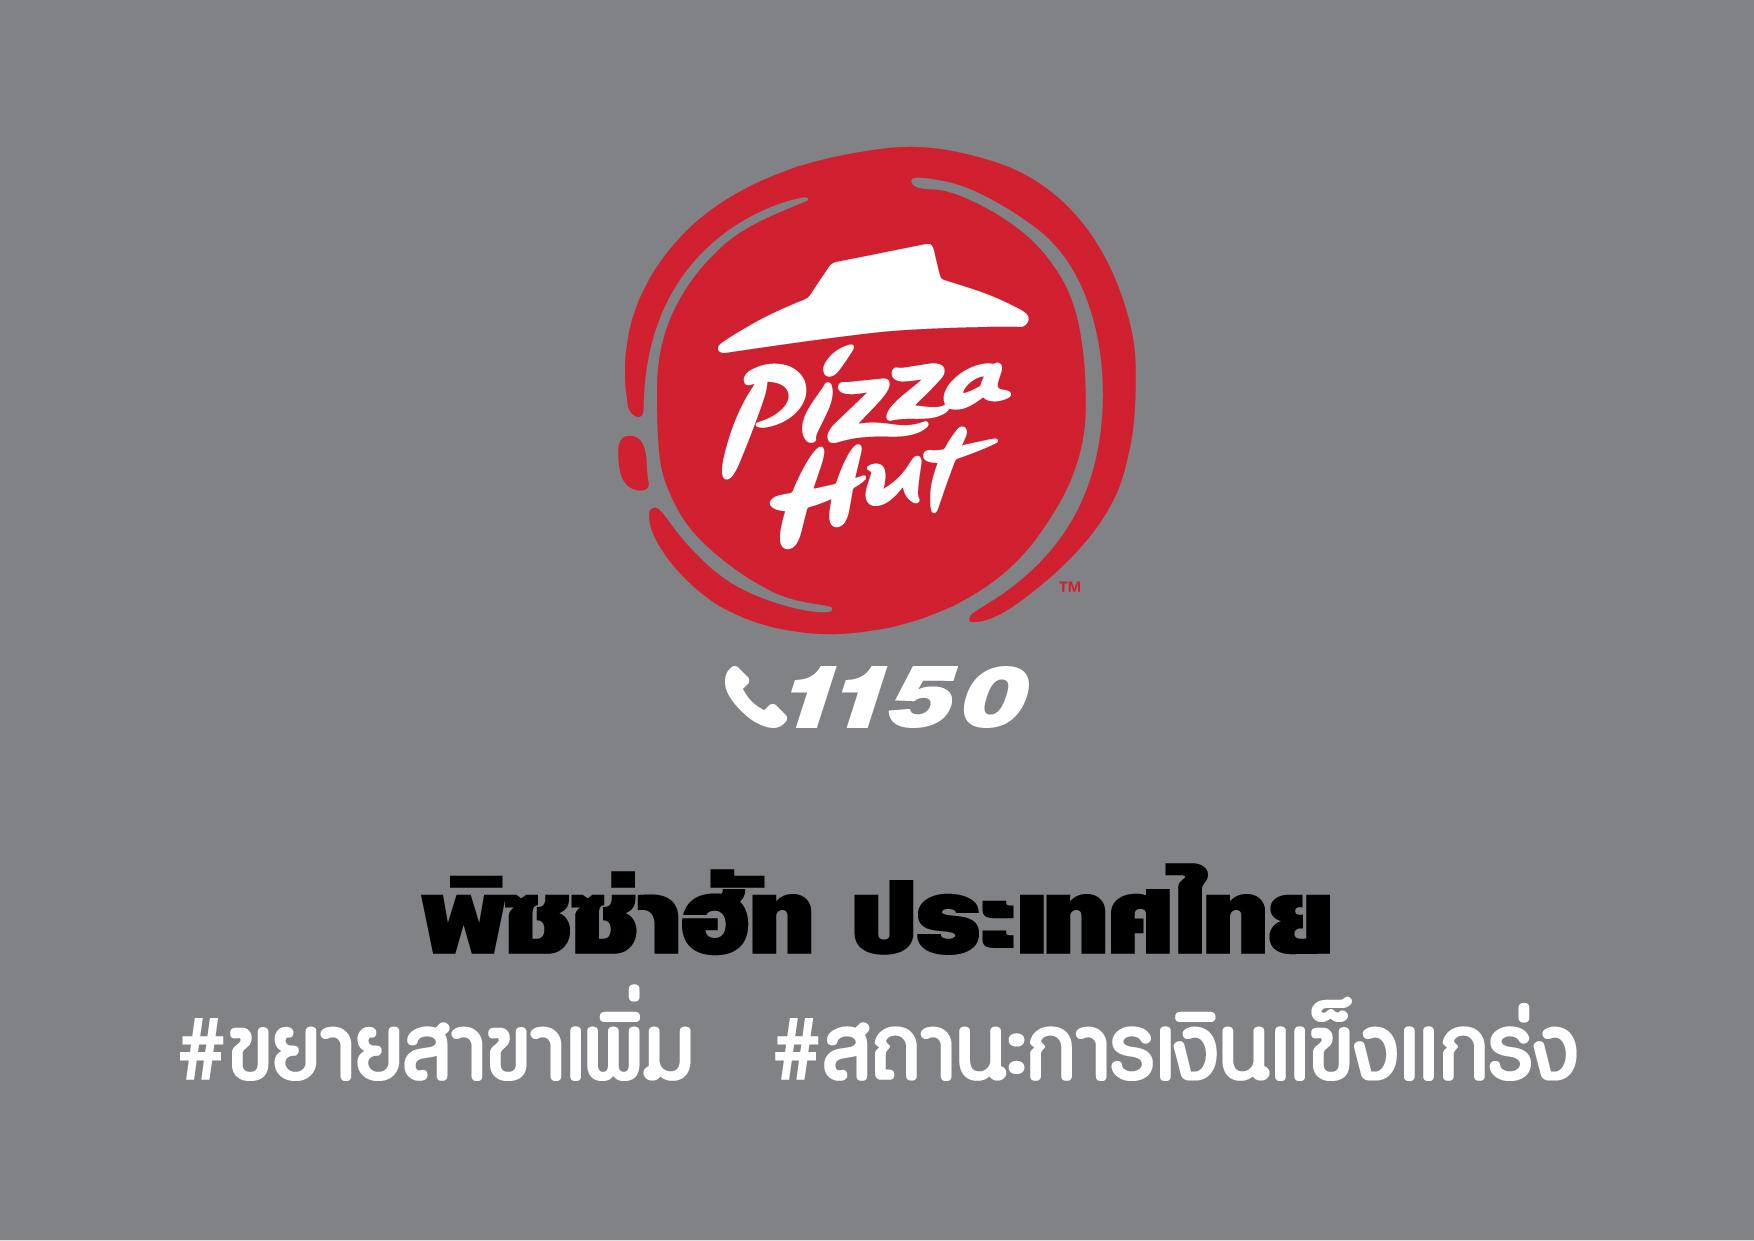 Pizza Hut Thailand Affirms Its Profitability and Strong Financial Position